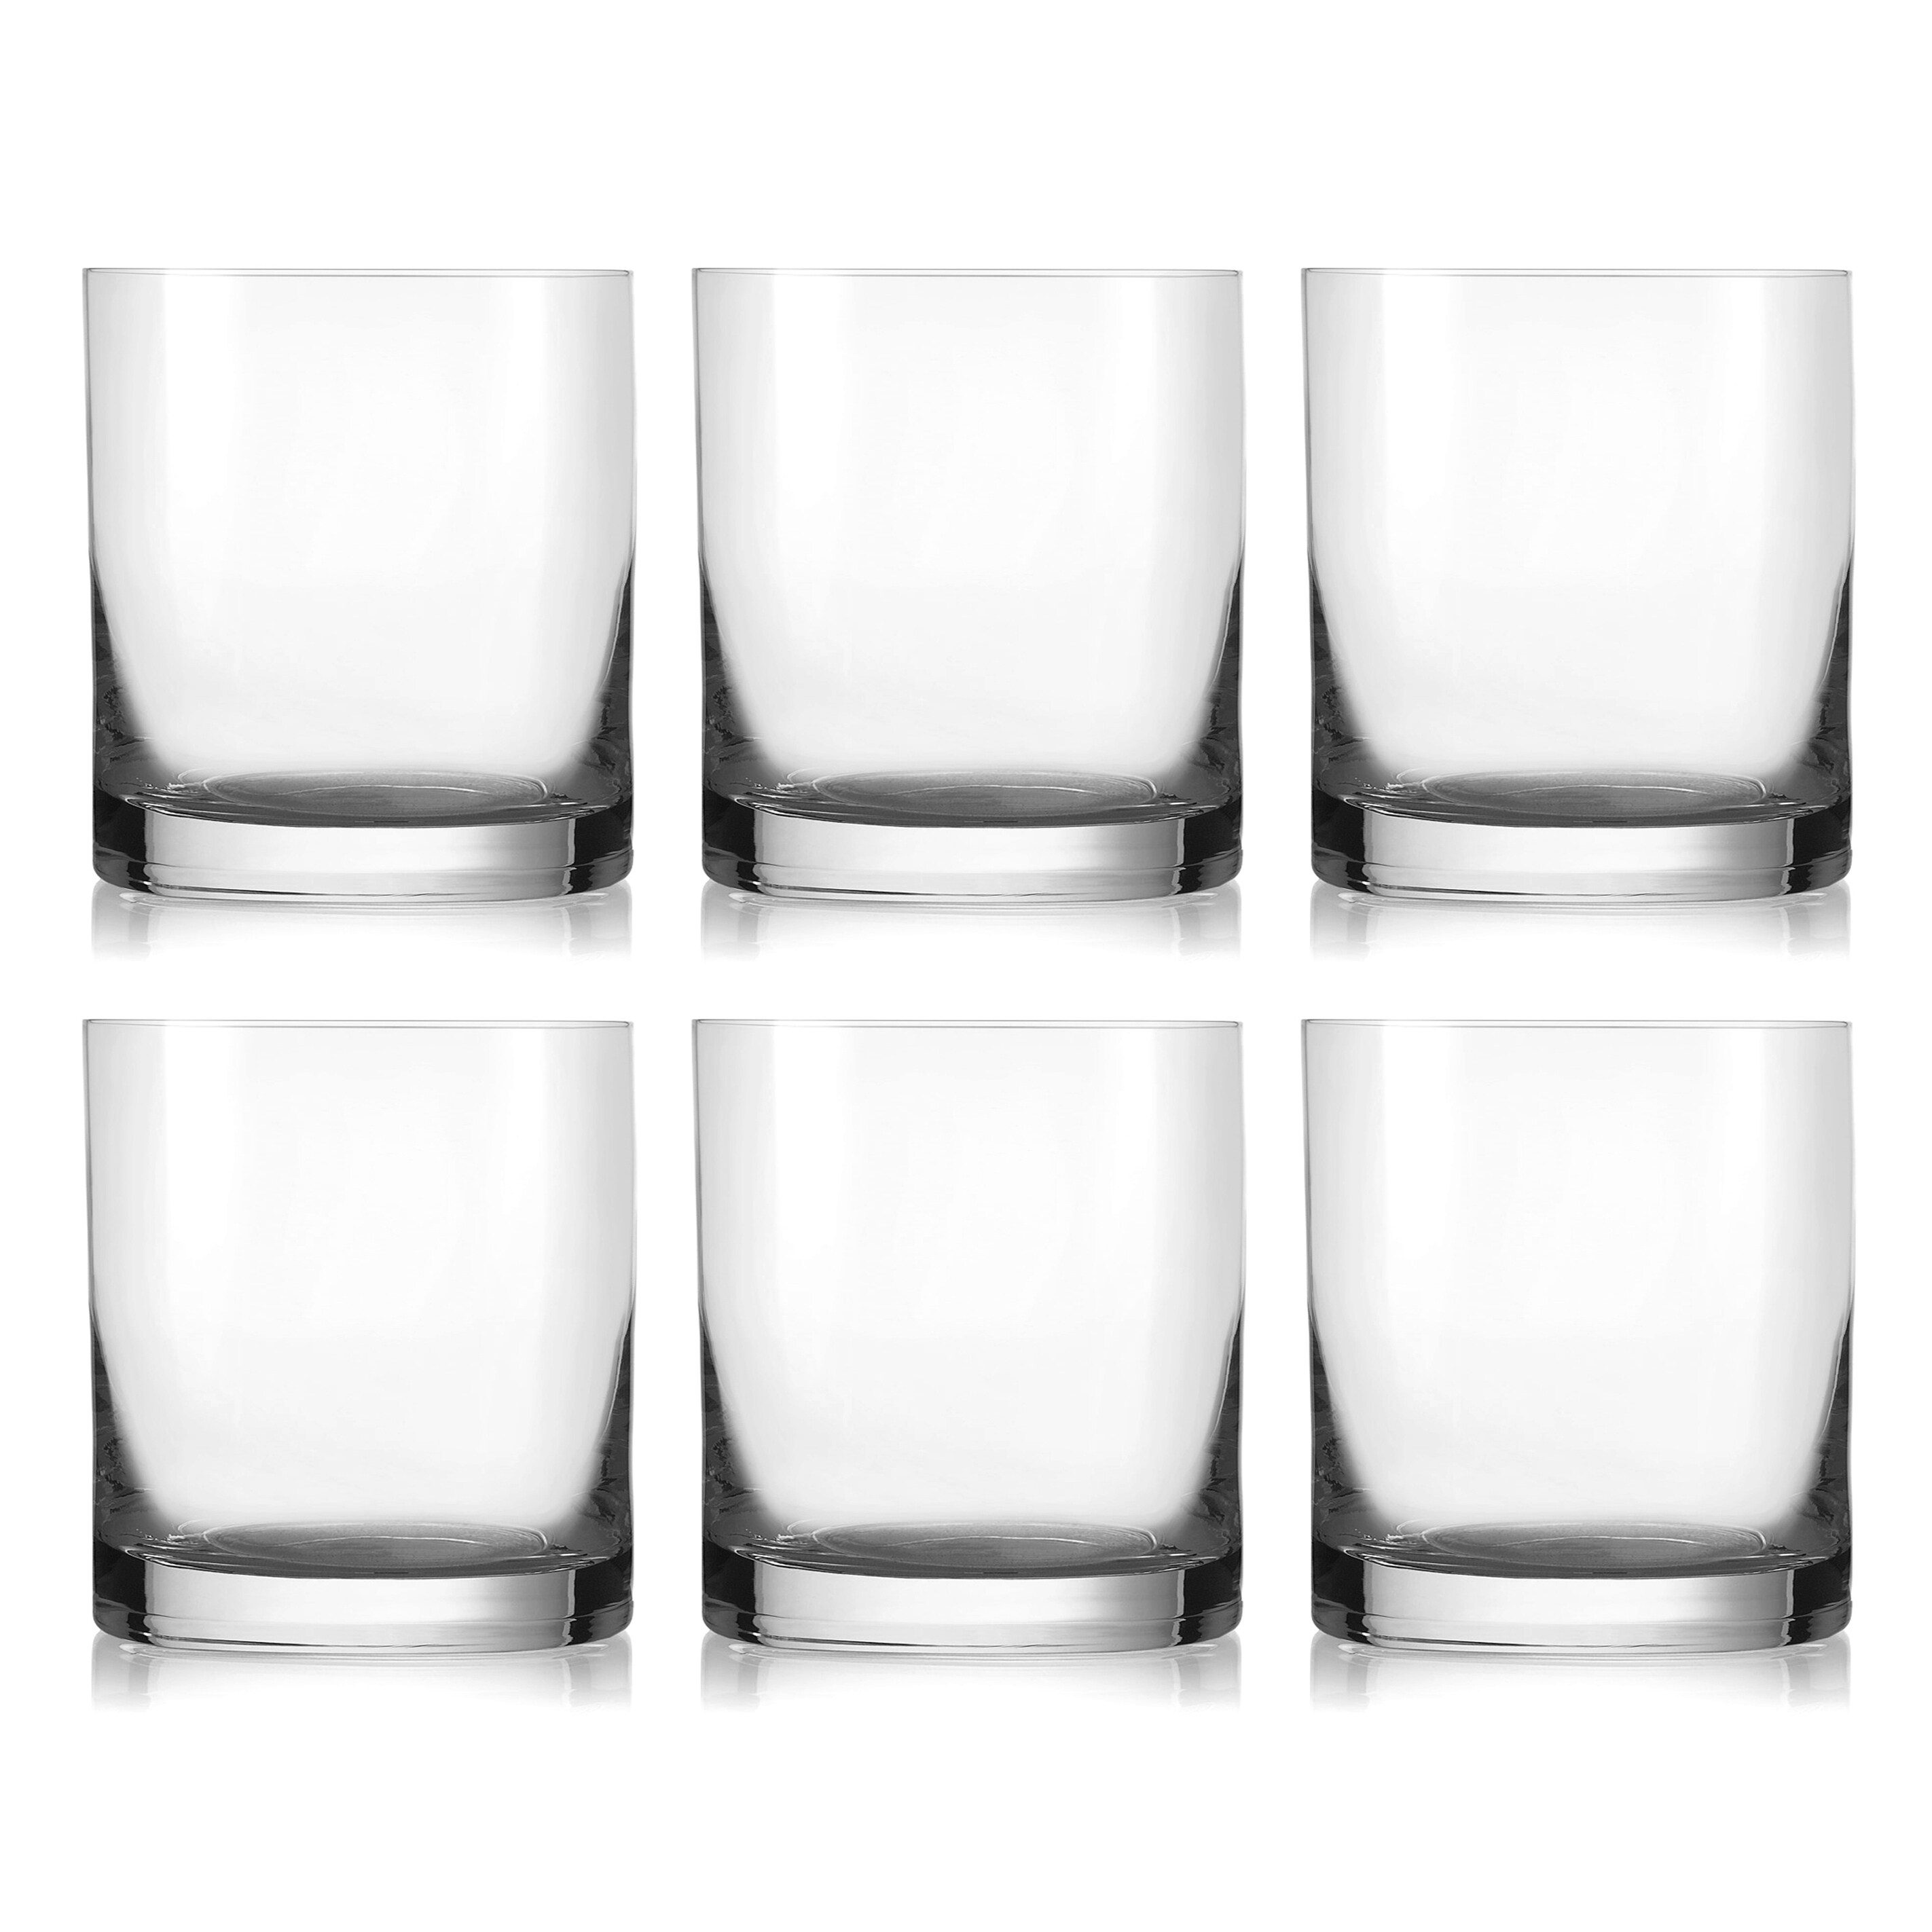 Highball Glass Set of 6 Hiball Glasses 12.75 oz. by Majestic Gifts Inc. Made in Europe